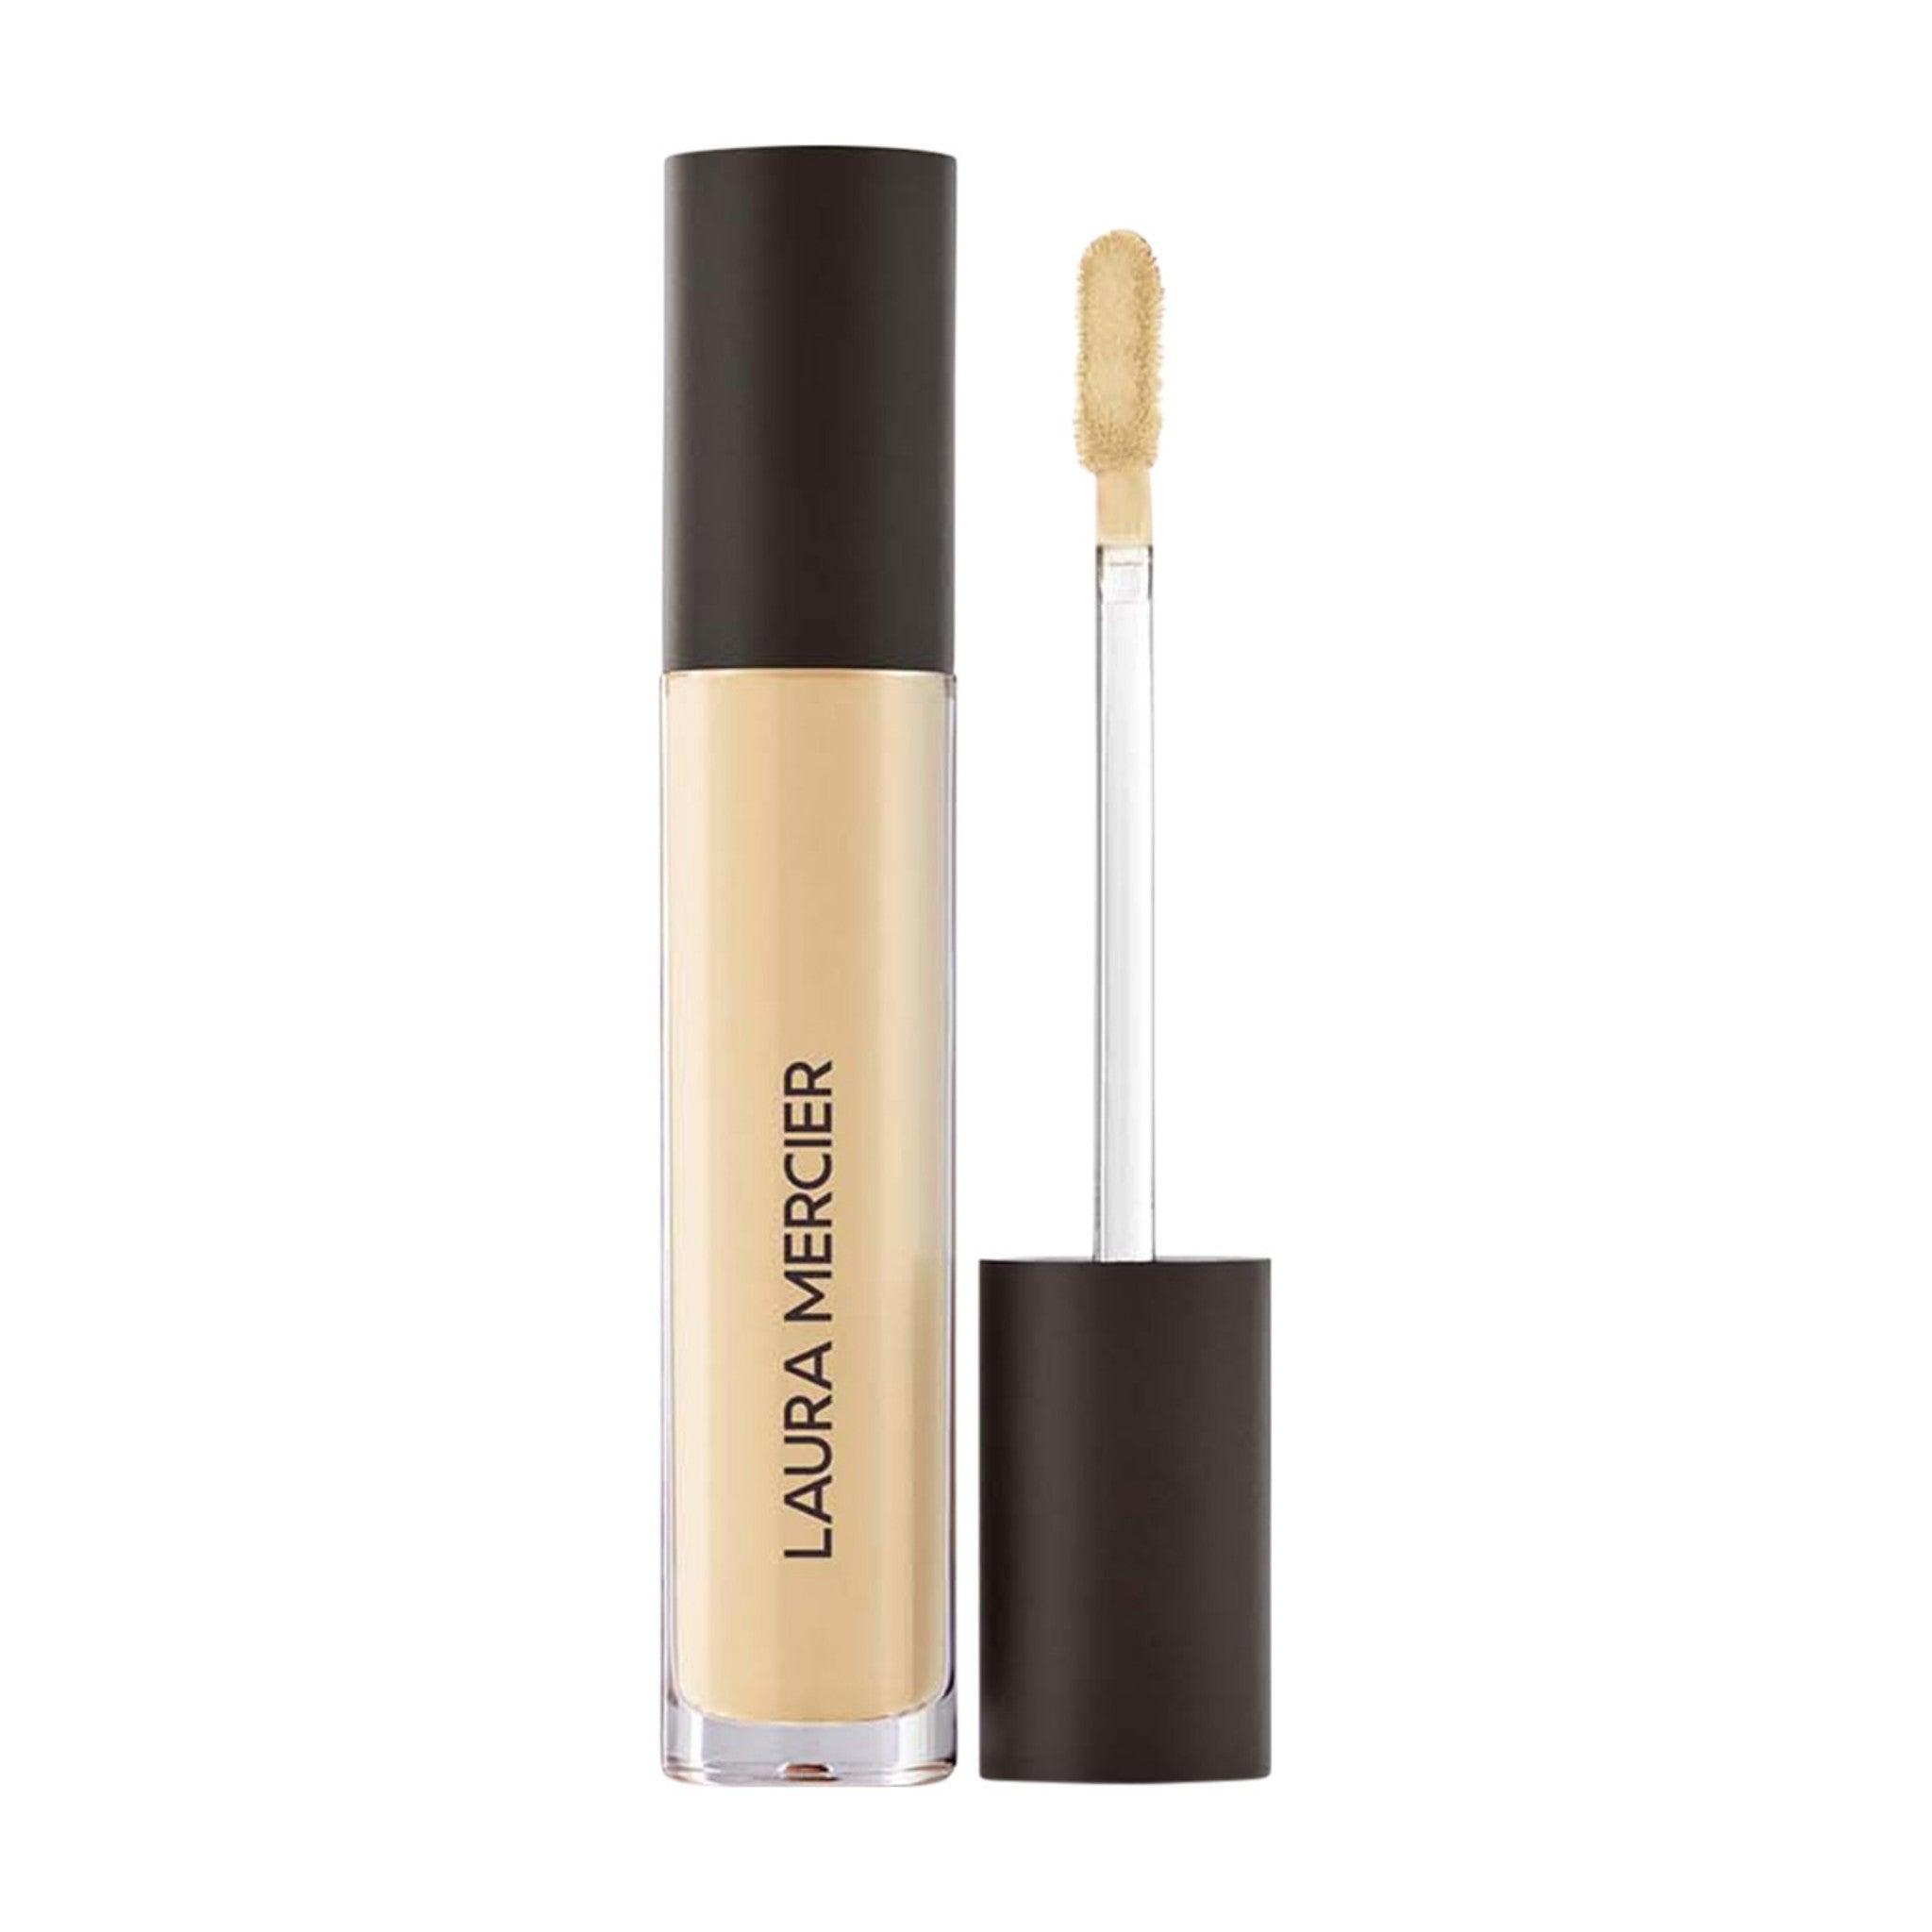 Laura Mercier Flawless Fusion Ultra-Longwear Concealer Color/Shade variant: 1W (Light with warm undertones) main image. This product is for light complexions